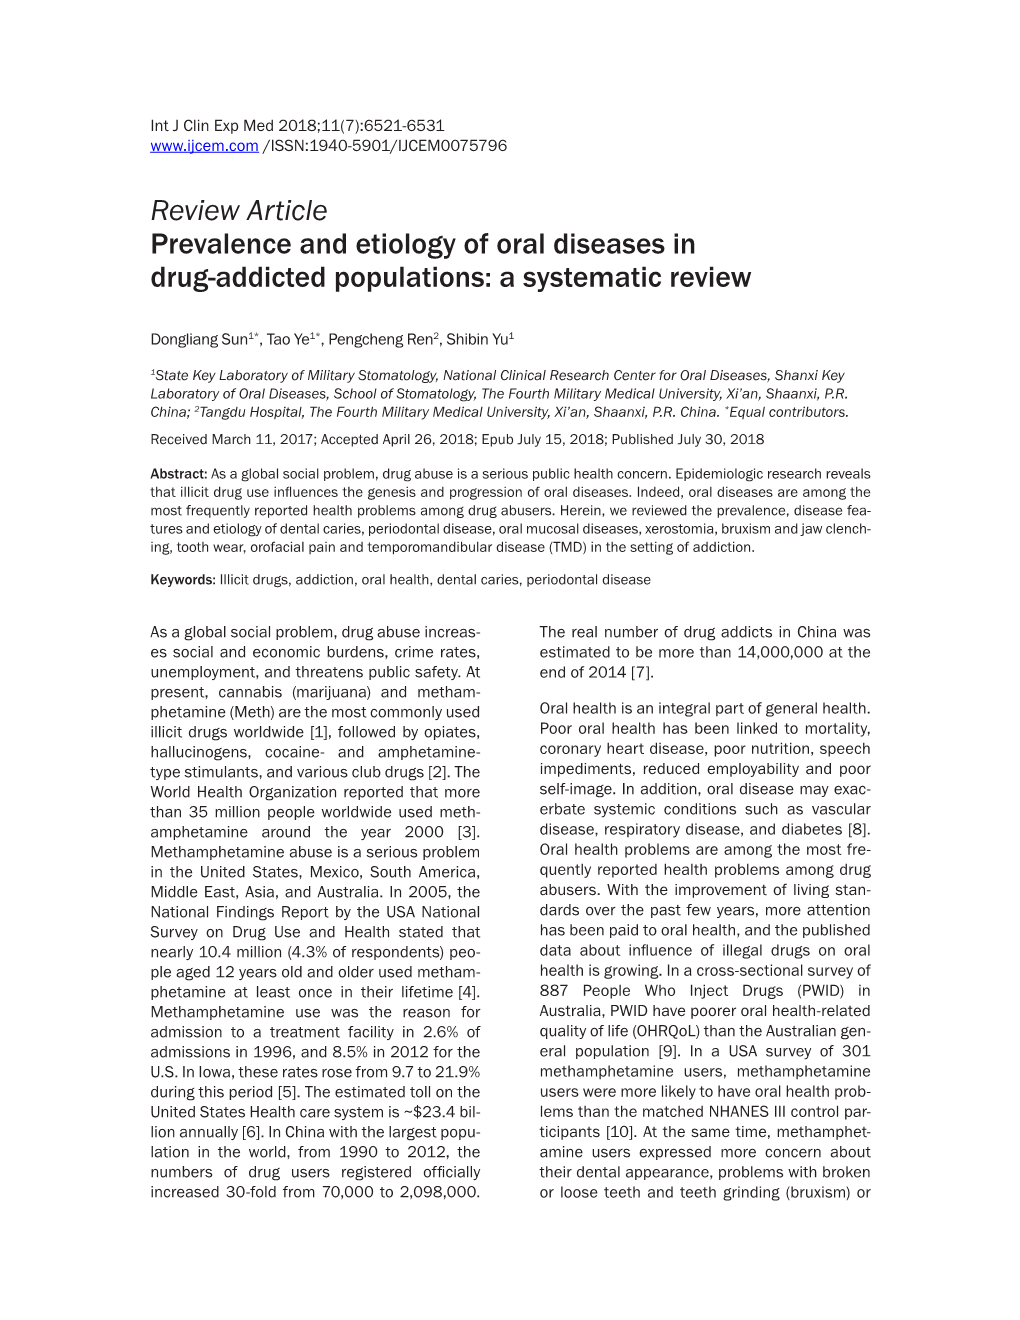 Review Article Prevalence and Etiology of Oral Diseases in Drug-Addicted Populations: a Systematic Review